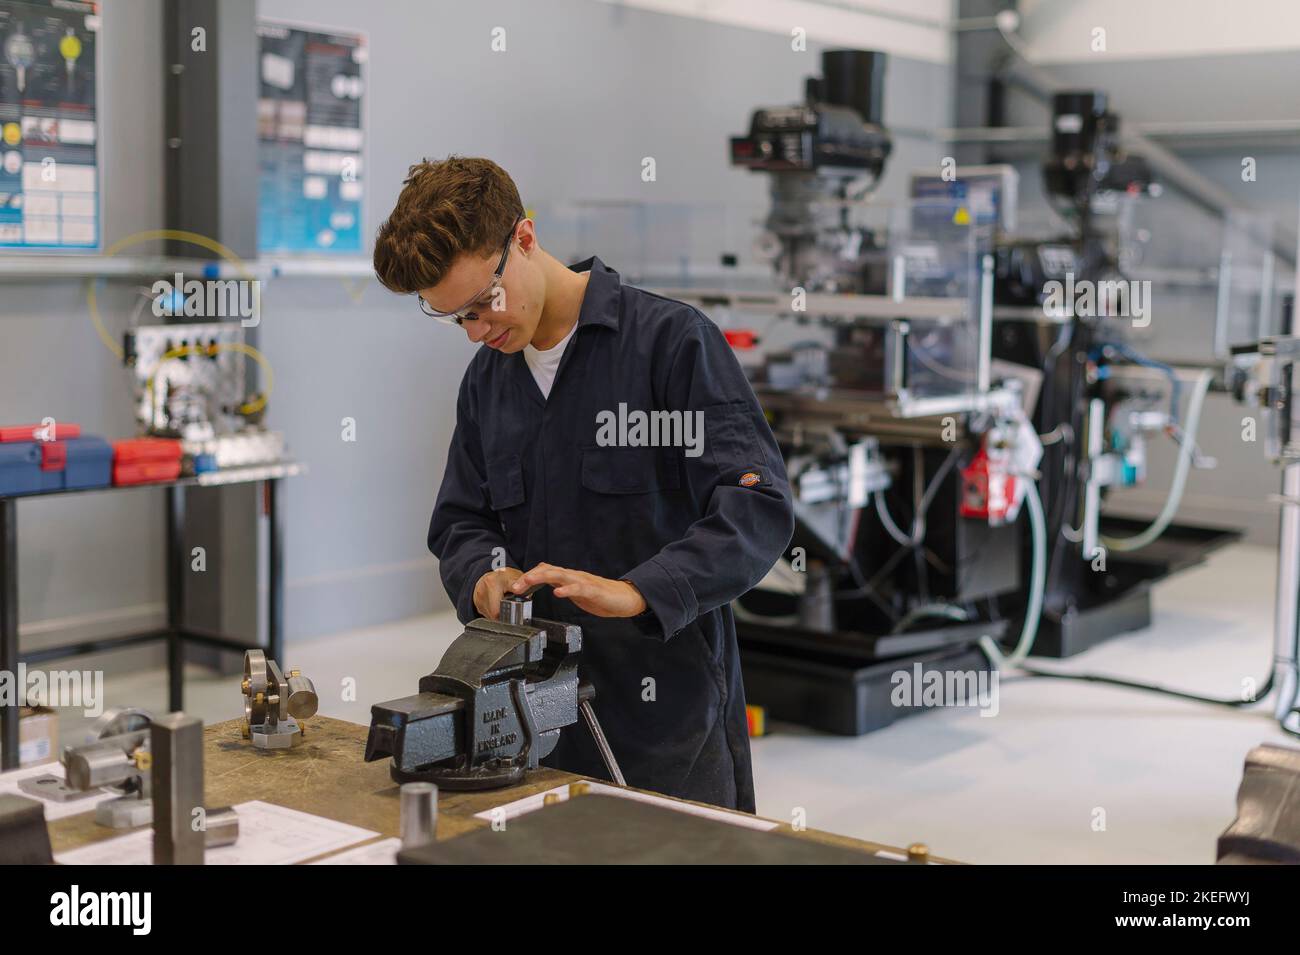 An Engineering student using tools in an engineering centre, college, university. Stock Photo